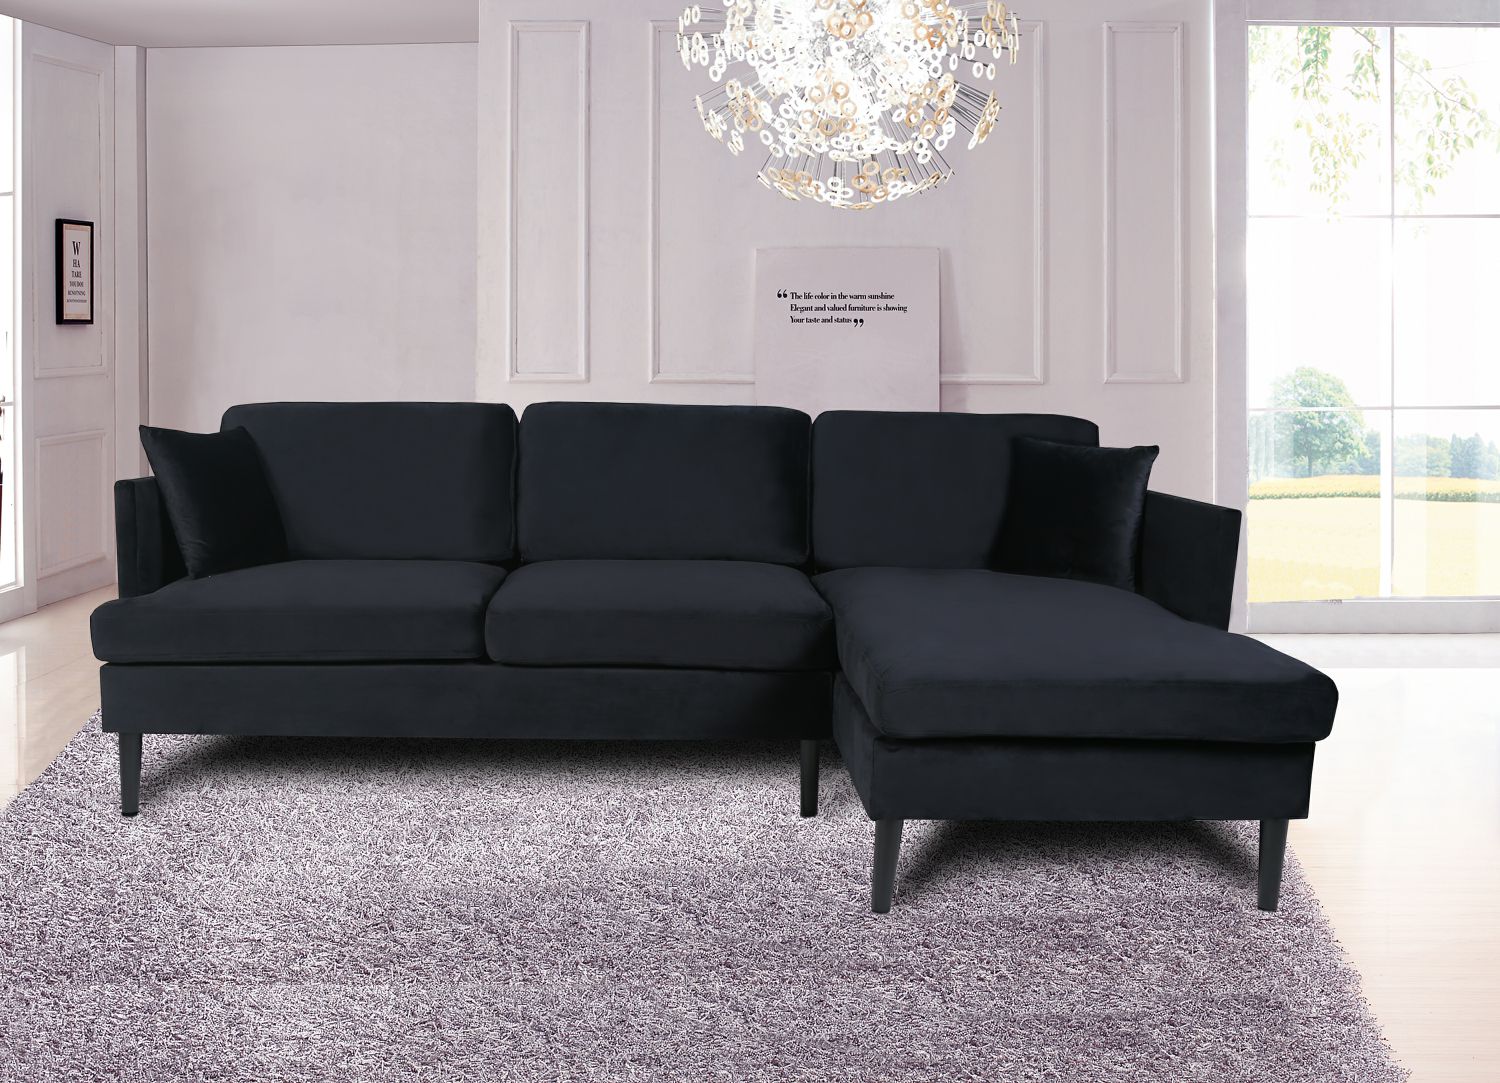 L-shape Sectional Sofa Velvet Right Hand Facing with Solid Wood Legs and Removable and Washable Seat Cover，Black - image 1 of 7